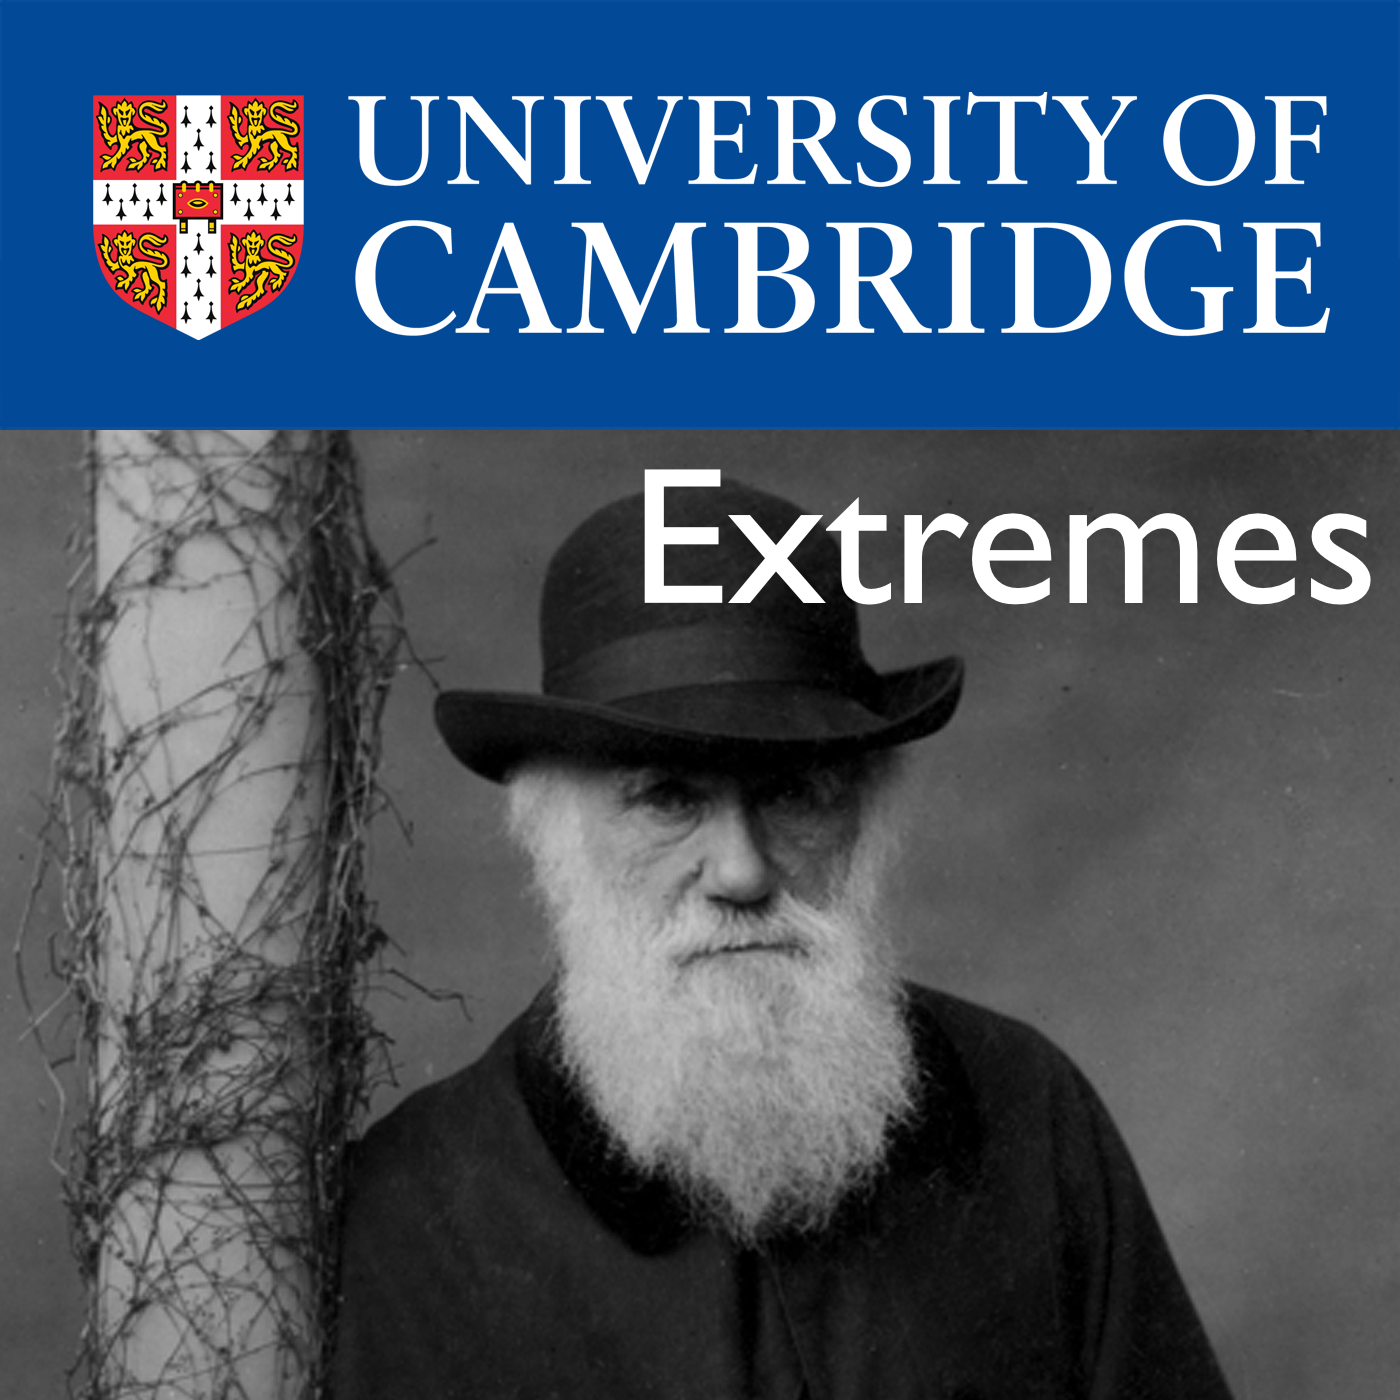 Extremes – Darwin College Lecture Series 2017's image